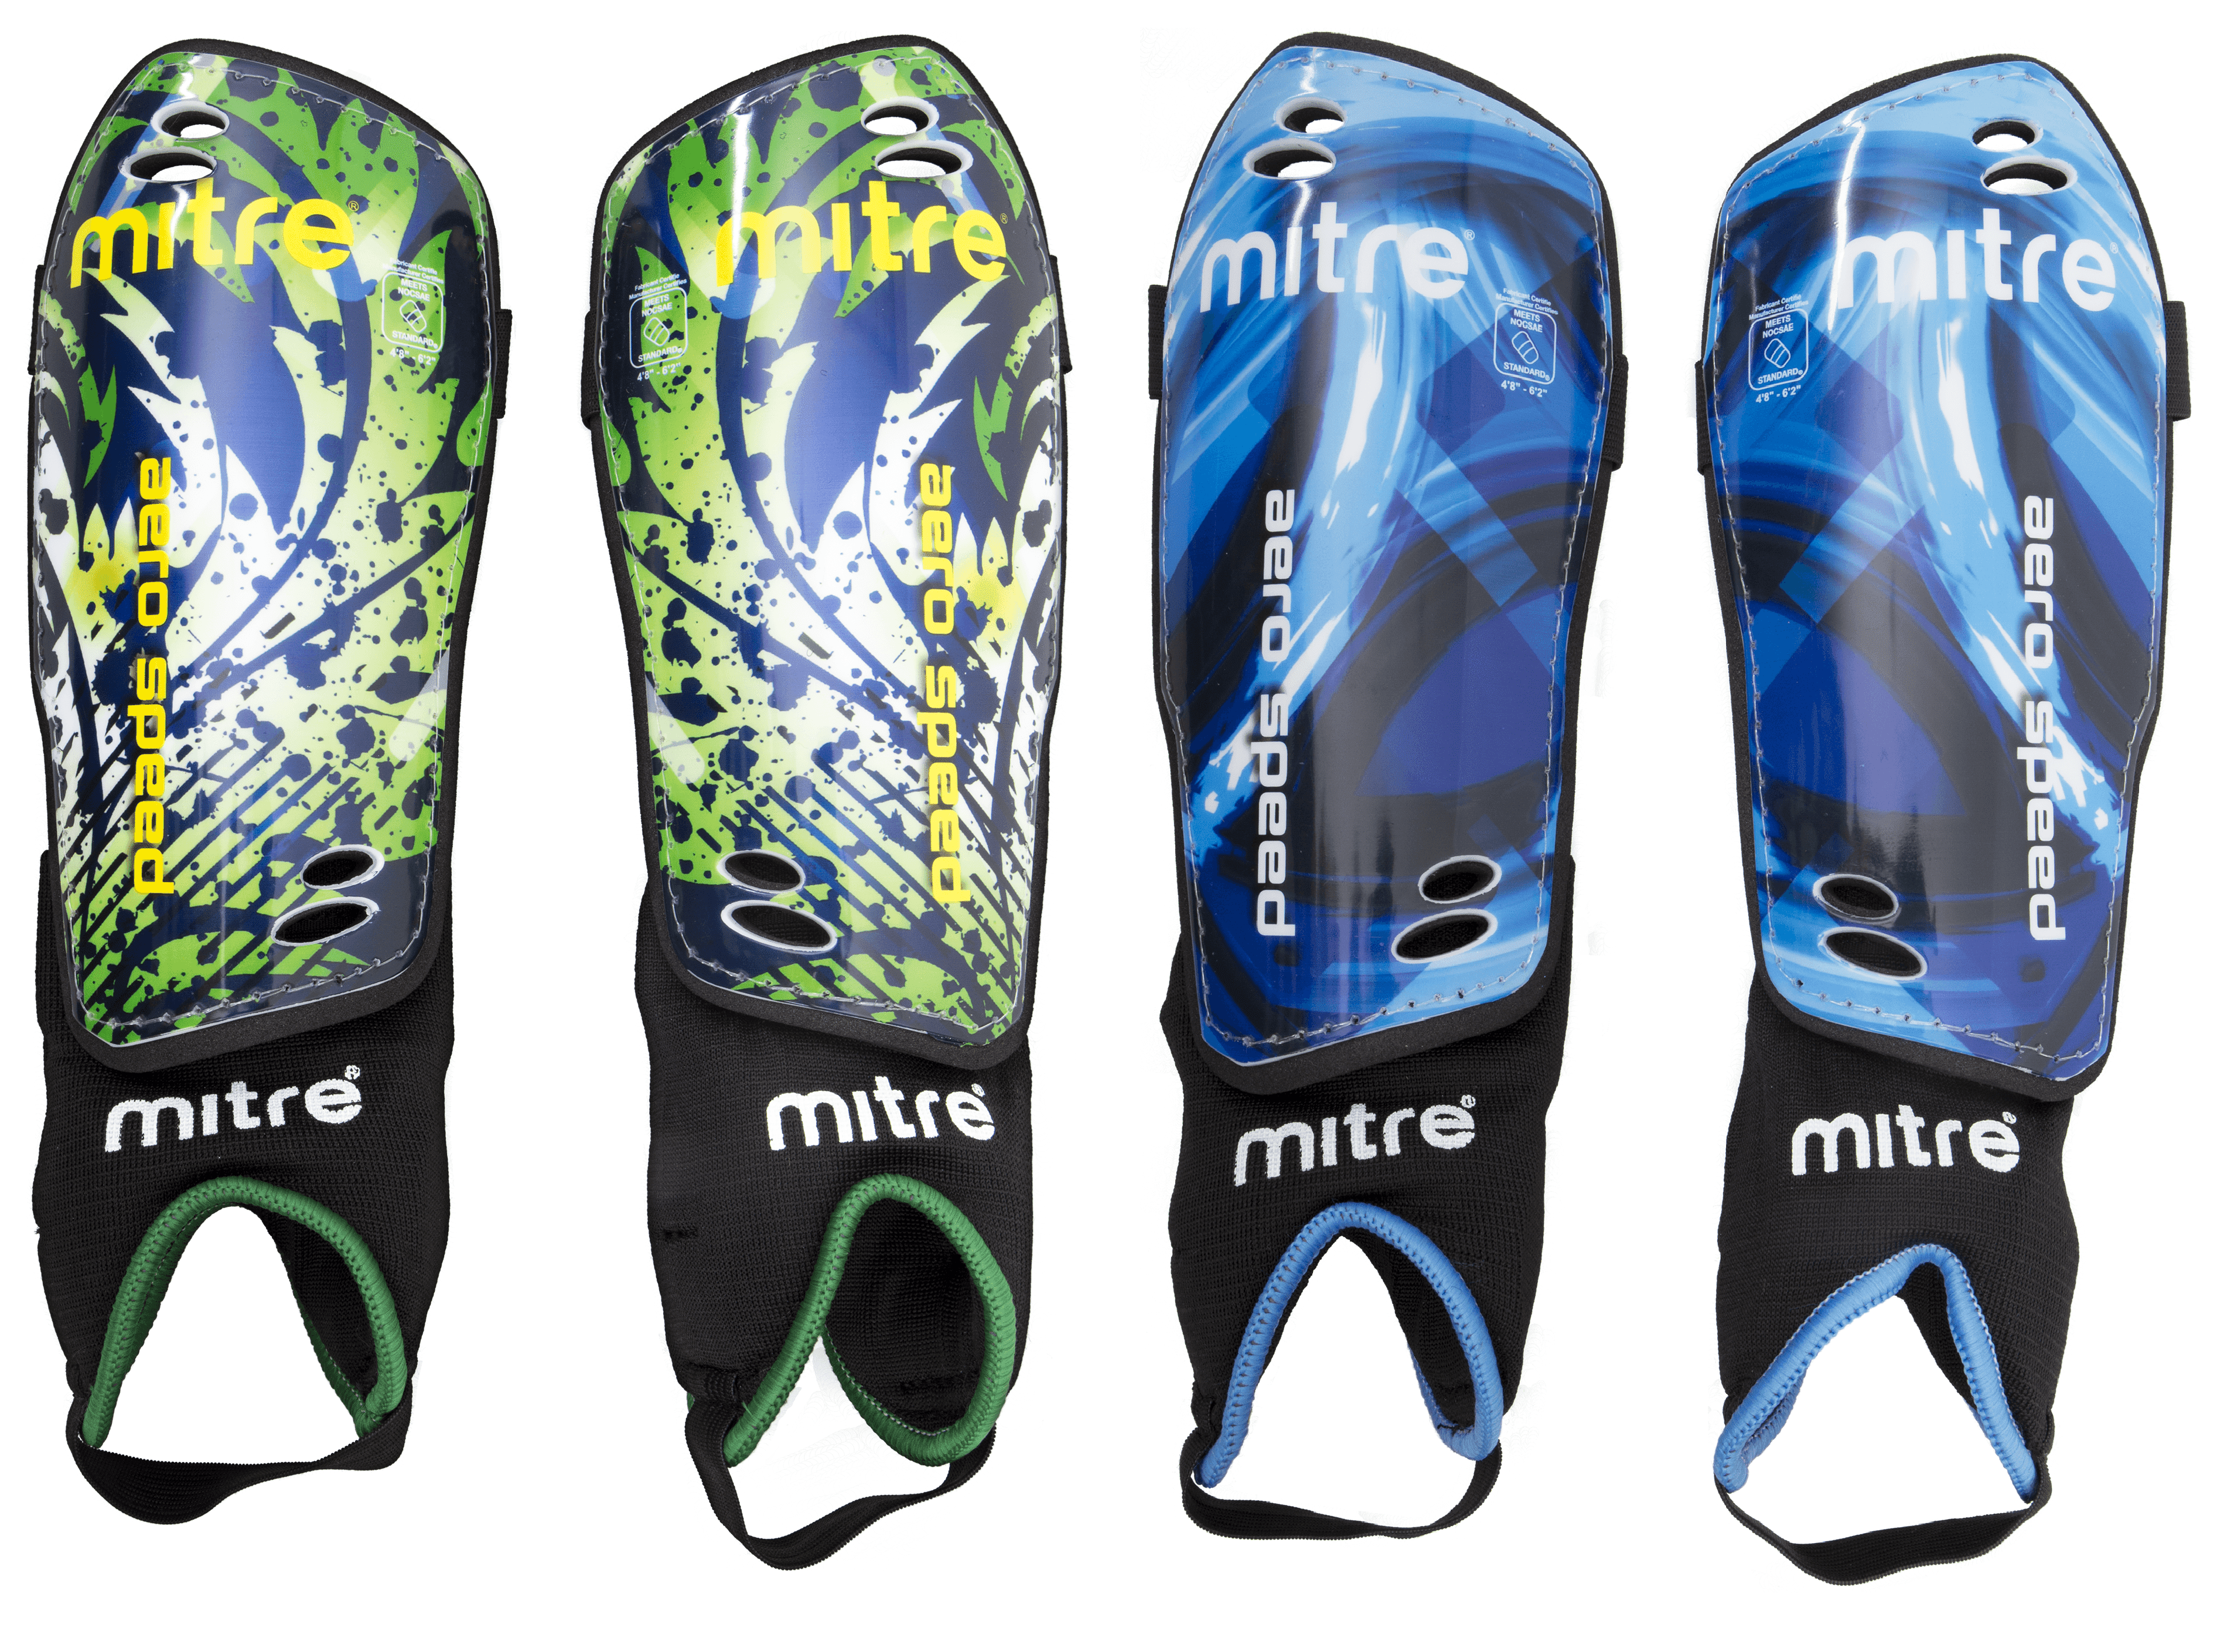 Aerospeed Shin Guard Size Youth 4’-4’8” Tall Blue Details about   Mitre 1 Pair 